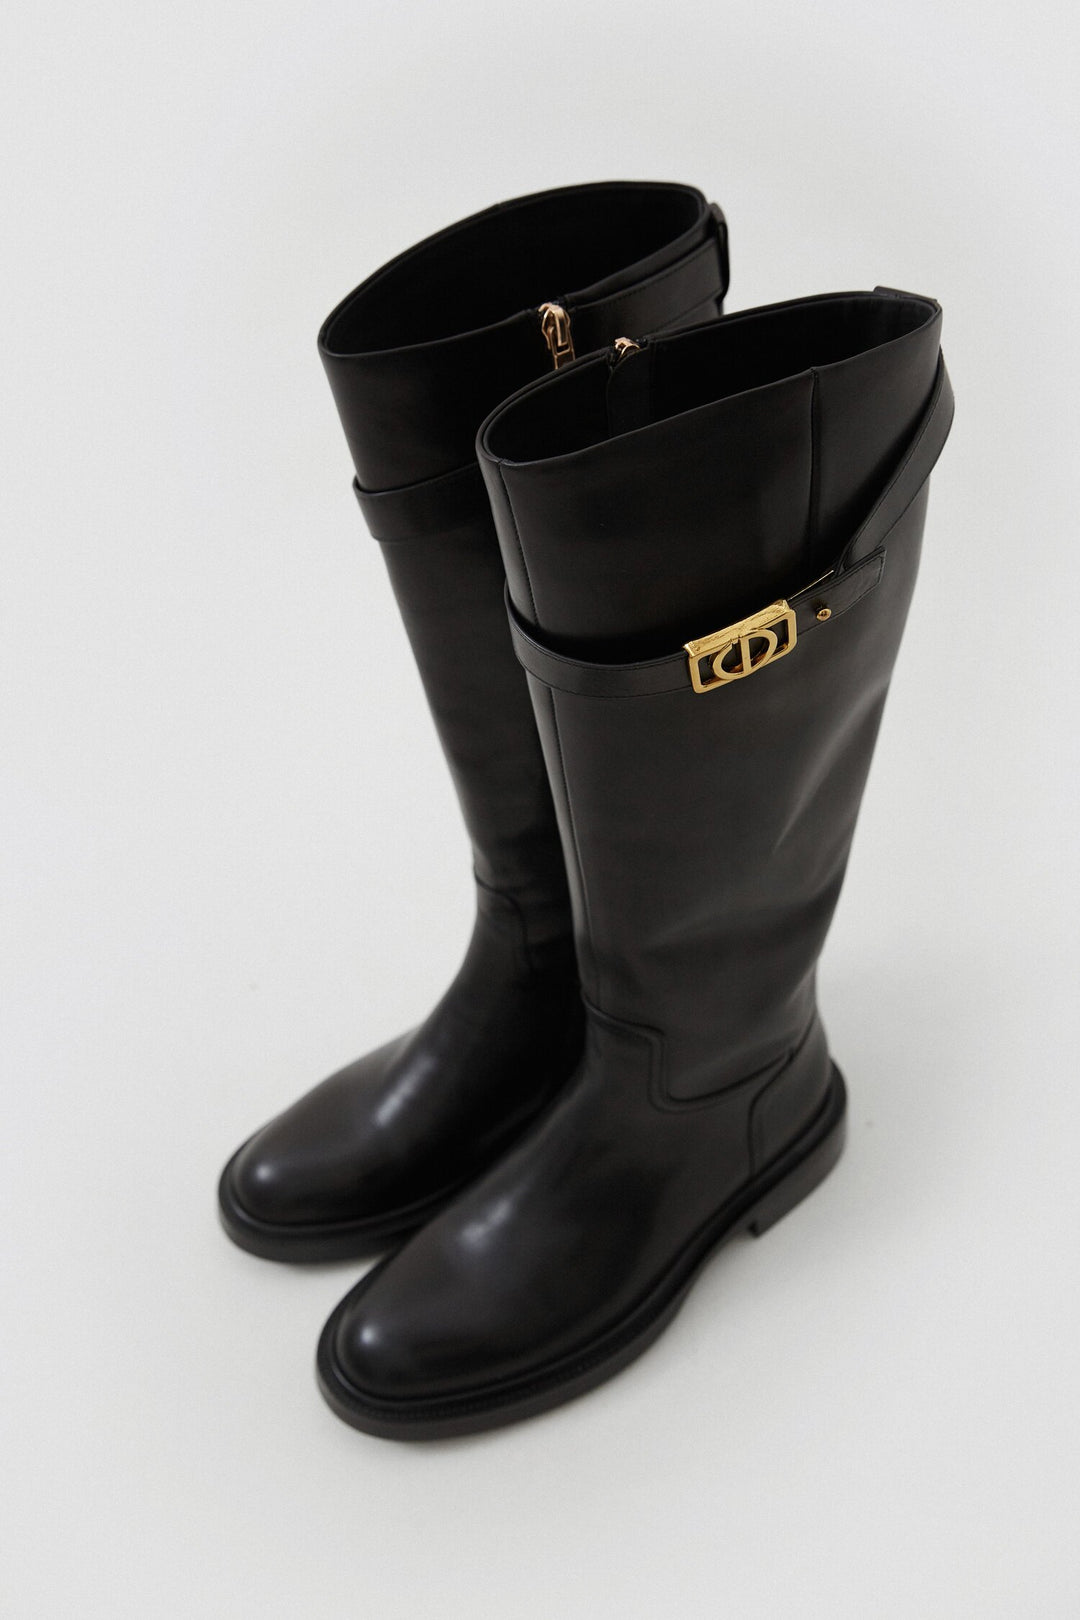 Women's black leather boots with decorative strap by Estro.